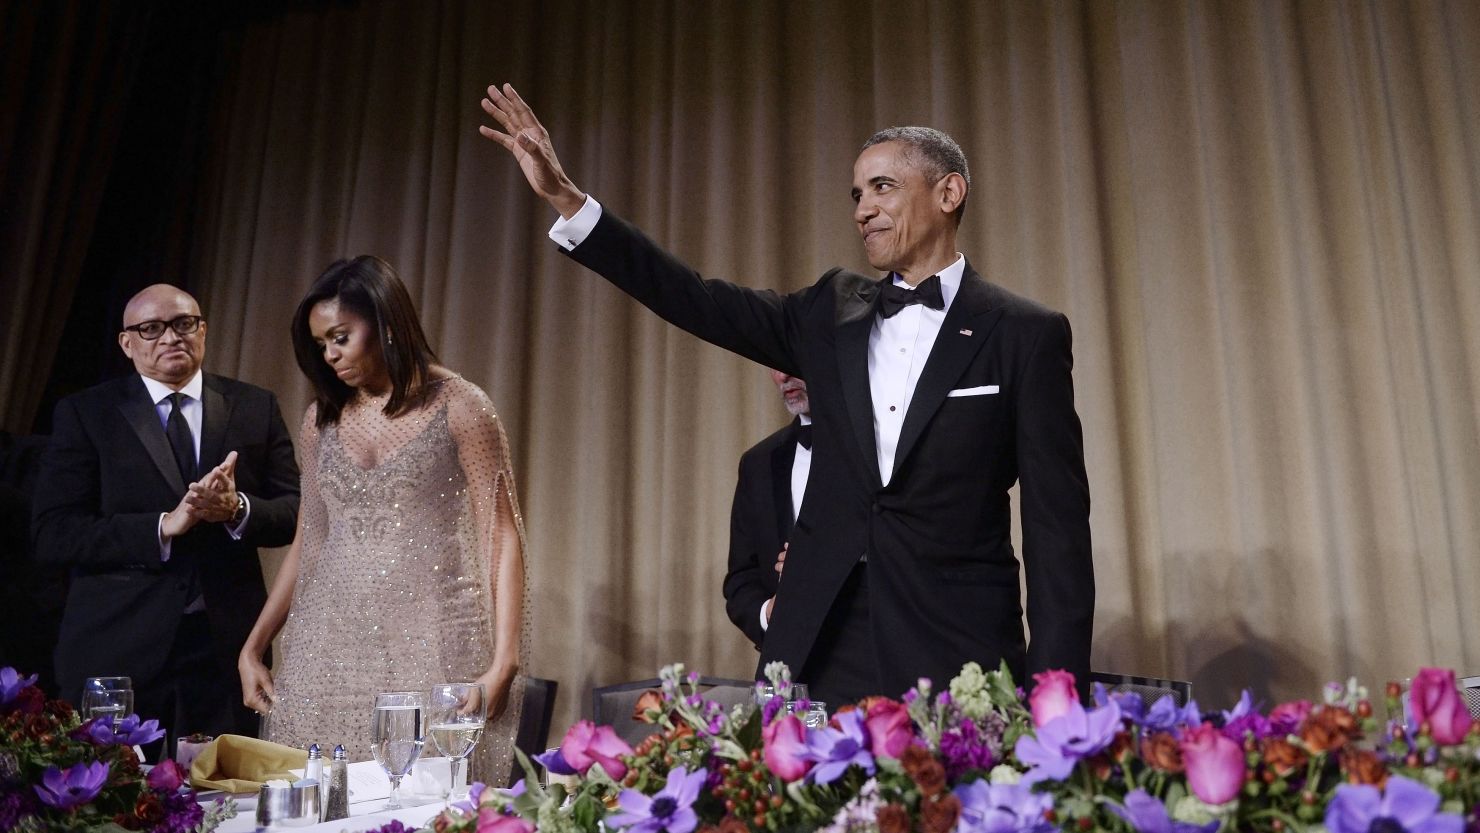 U.S. President Barack Obama waves to the audience after speaking at his final White House Correspondents' Association dinner.